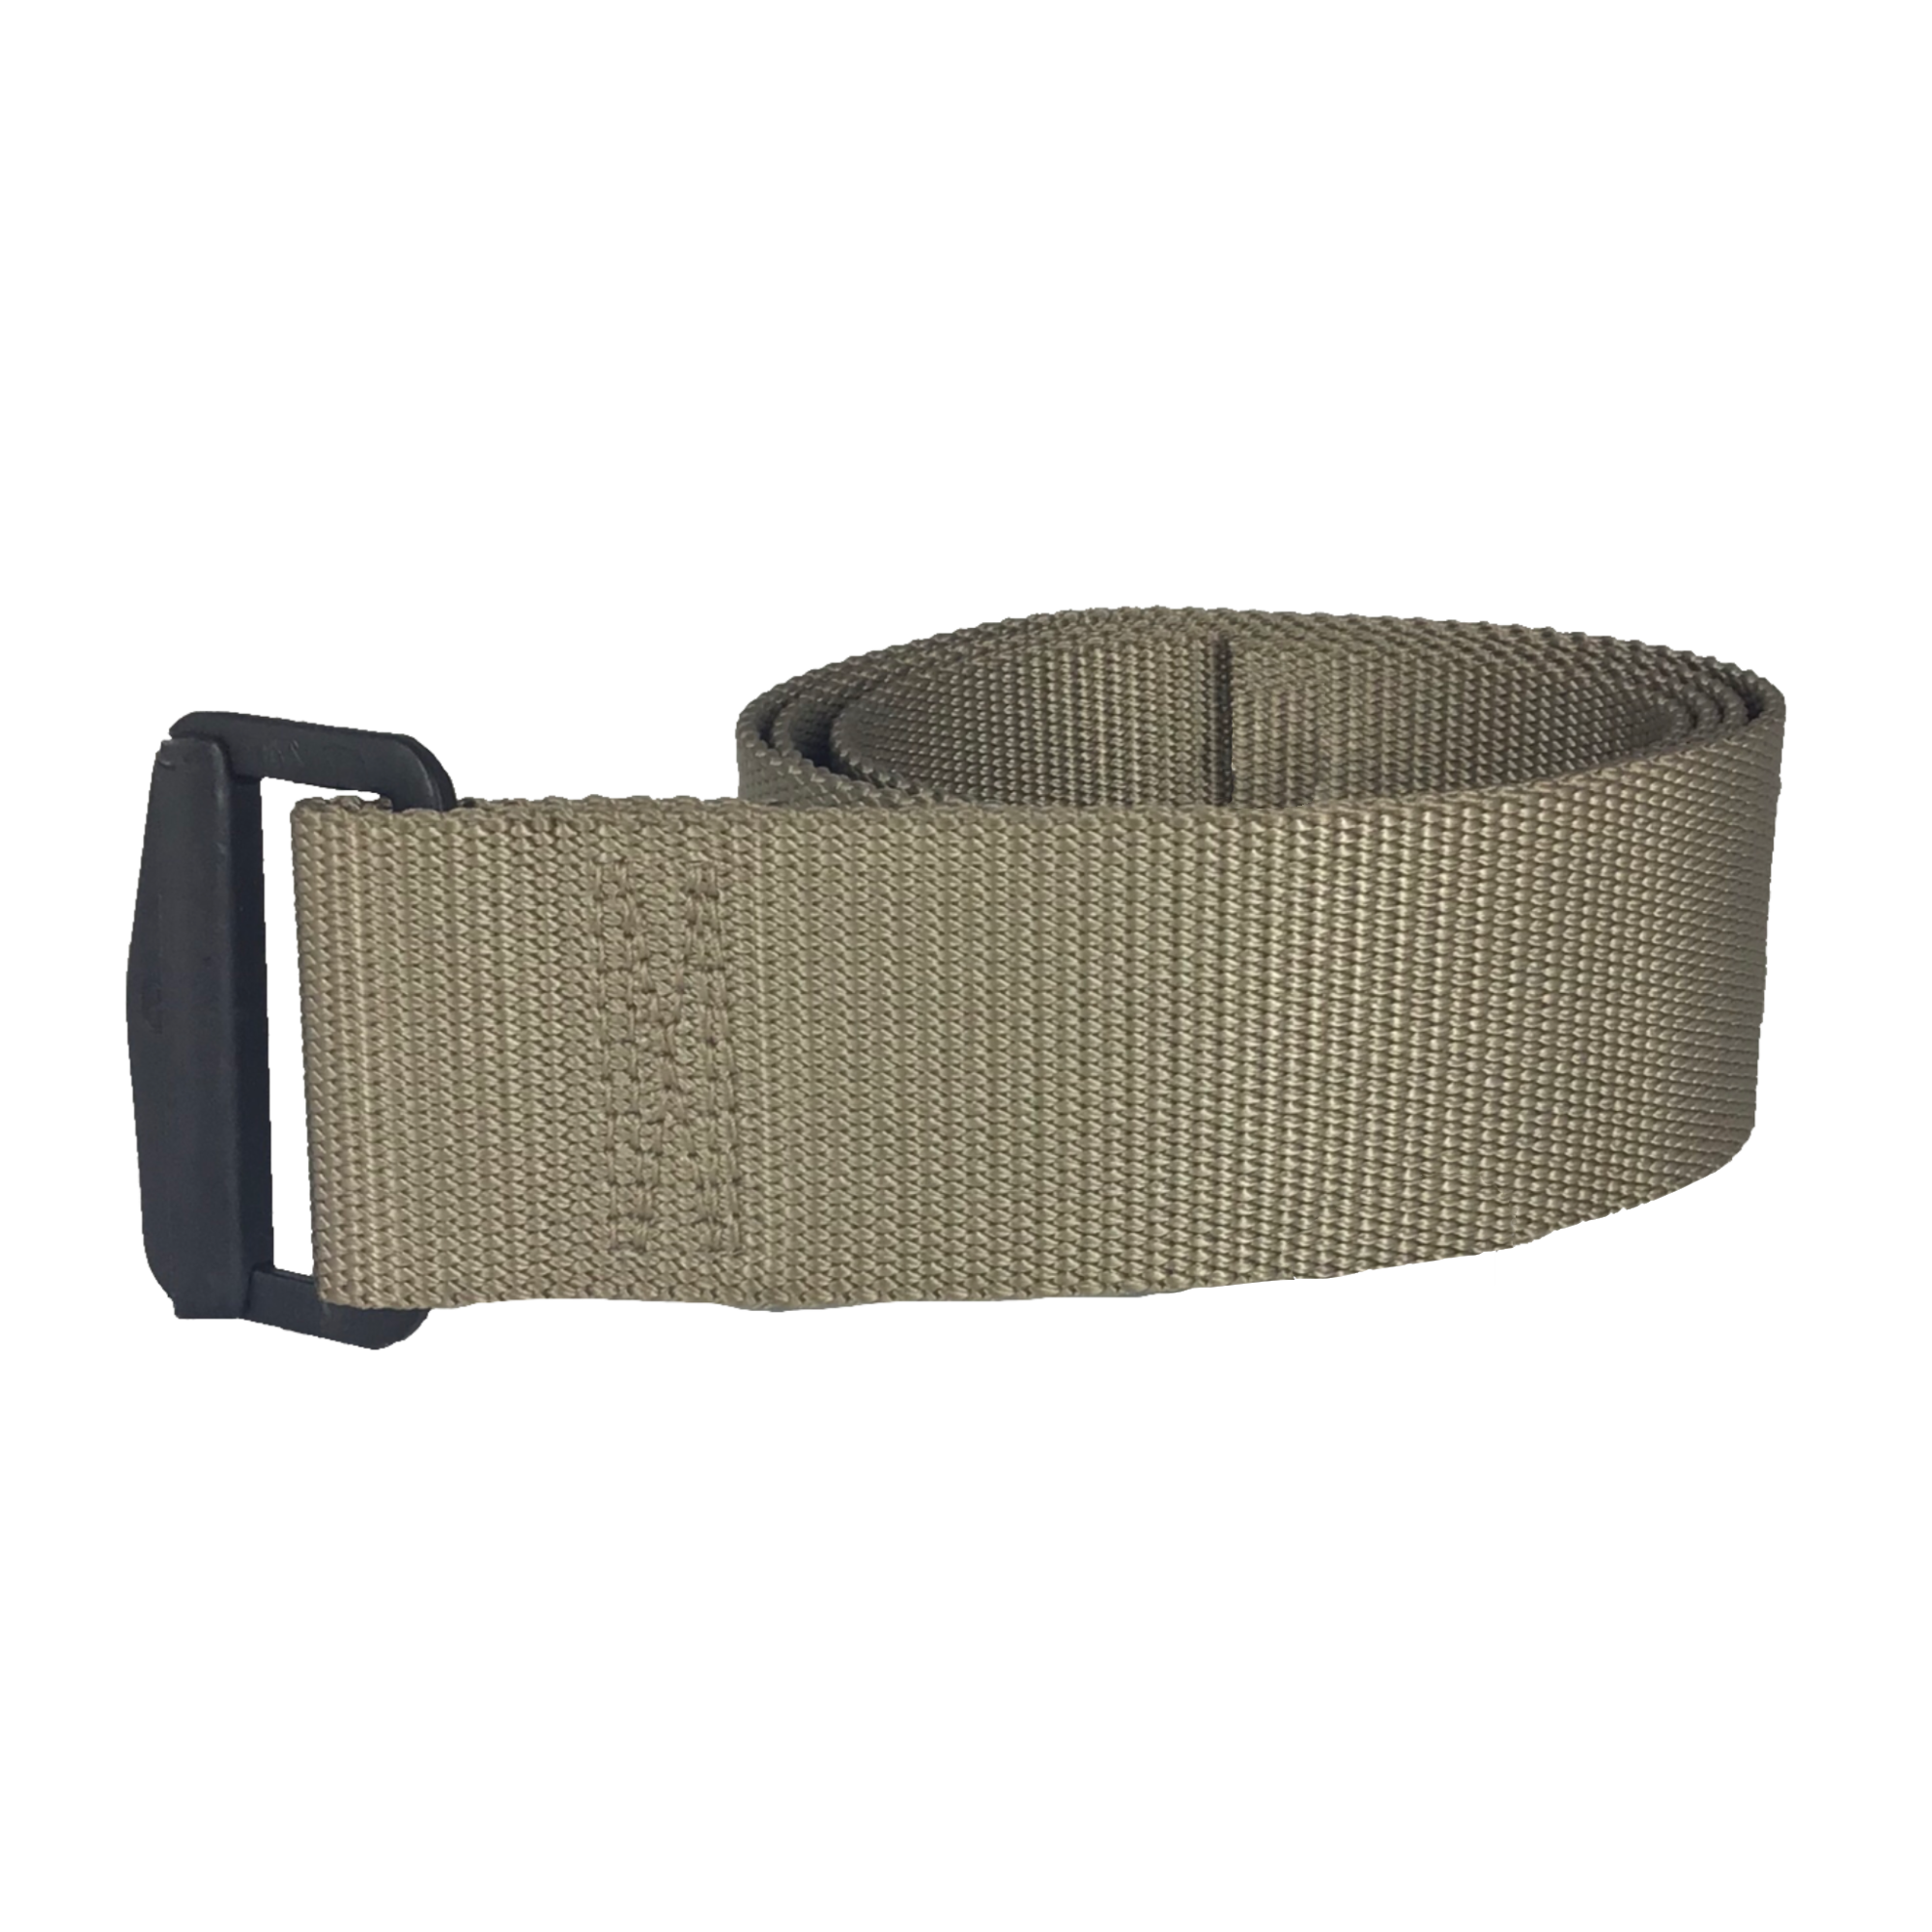 NAVY Tan Rigger Belt with Black D-Ring Buckle | Uniform Trading Company